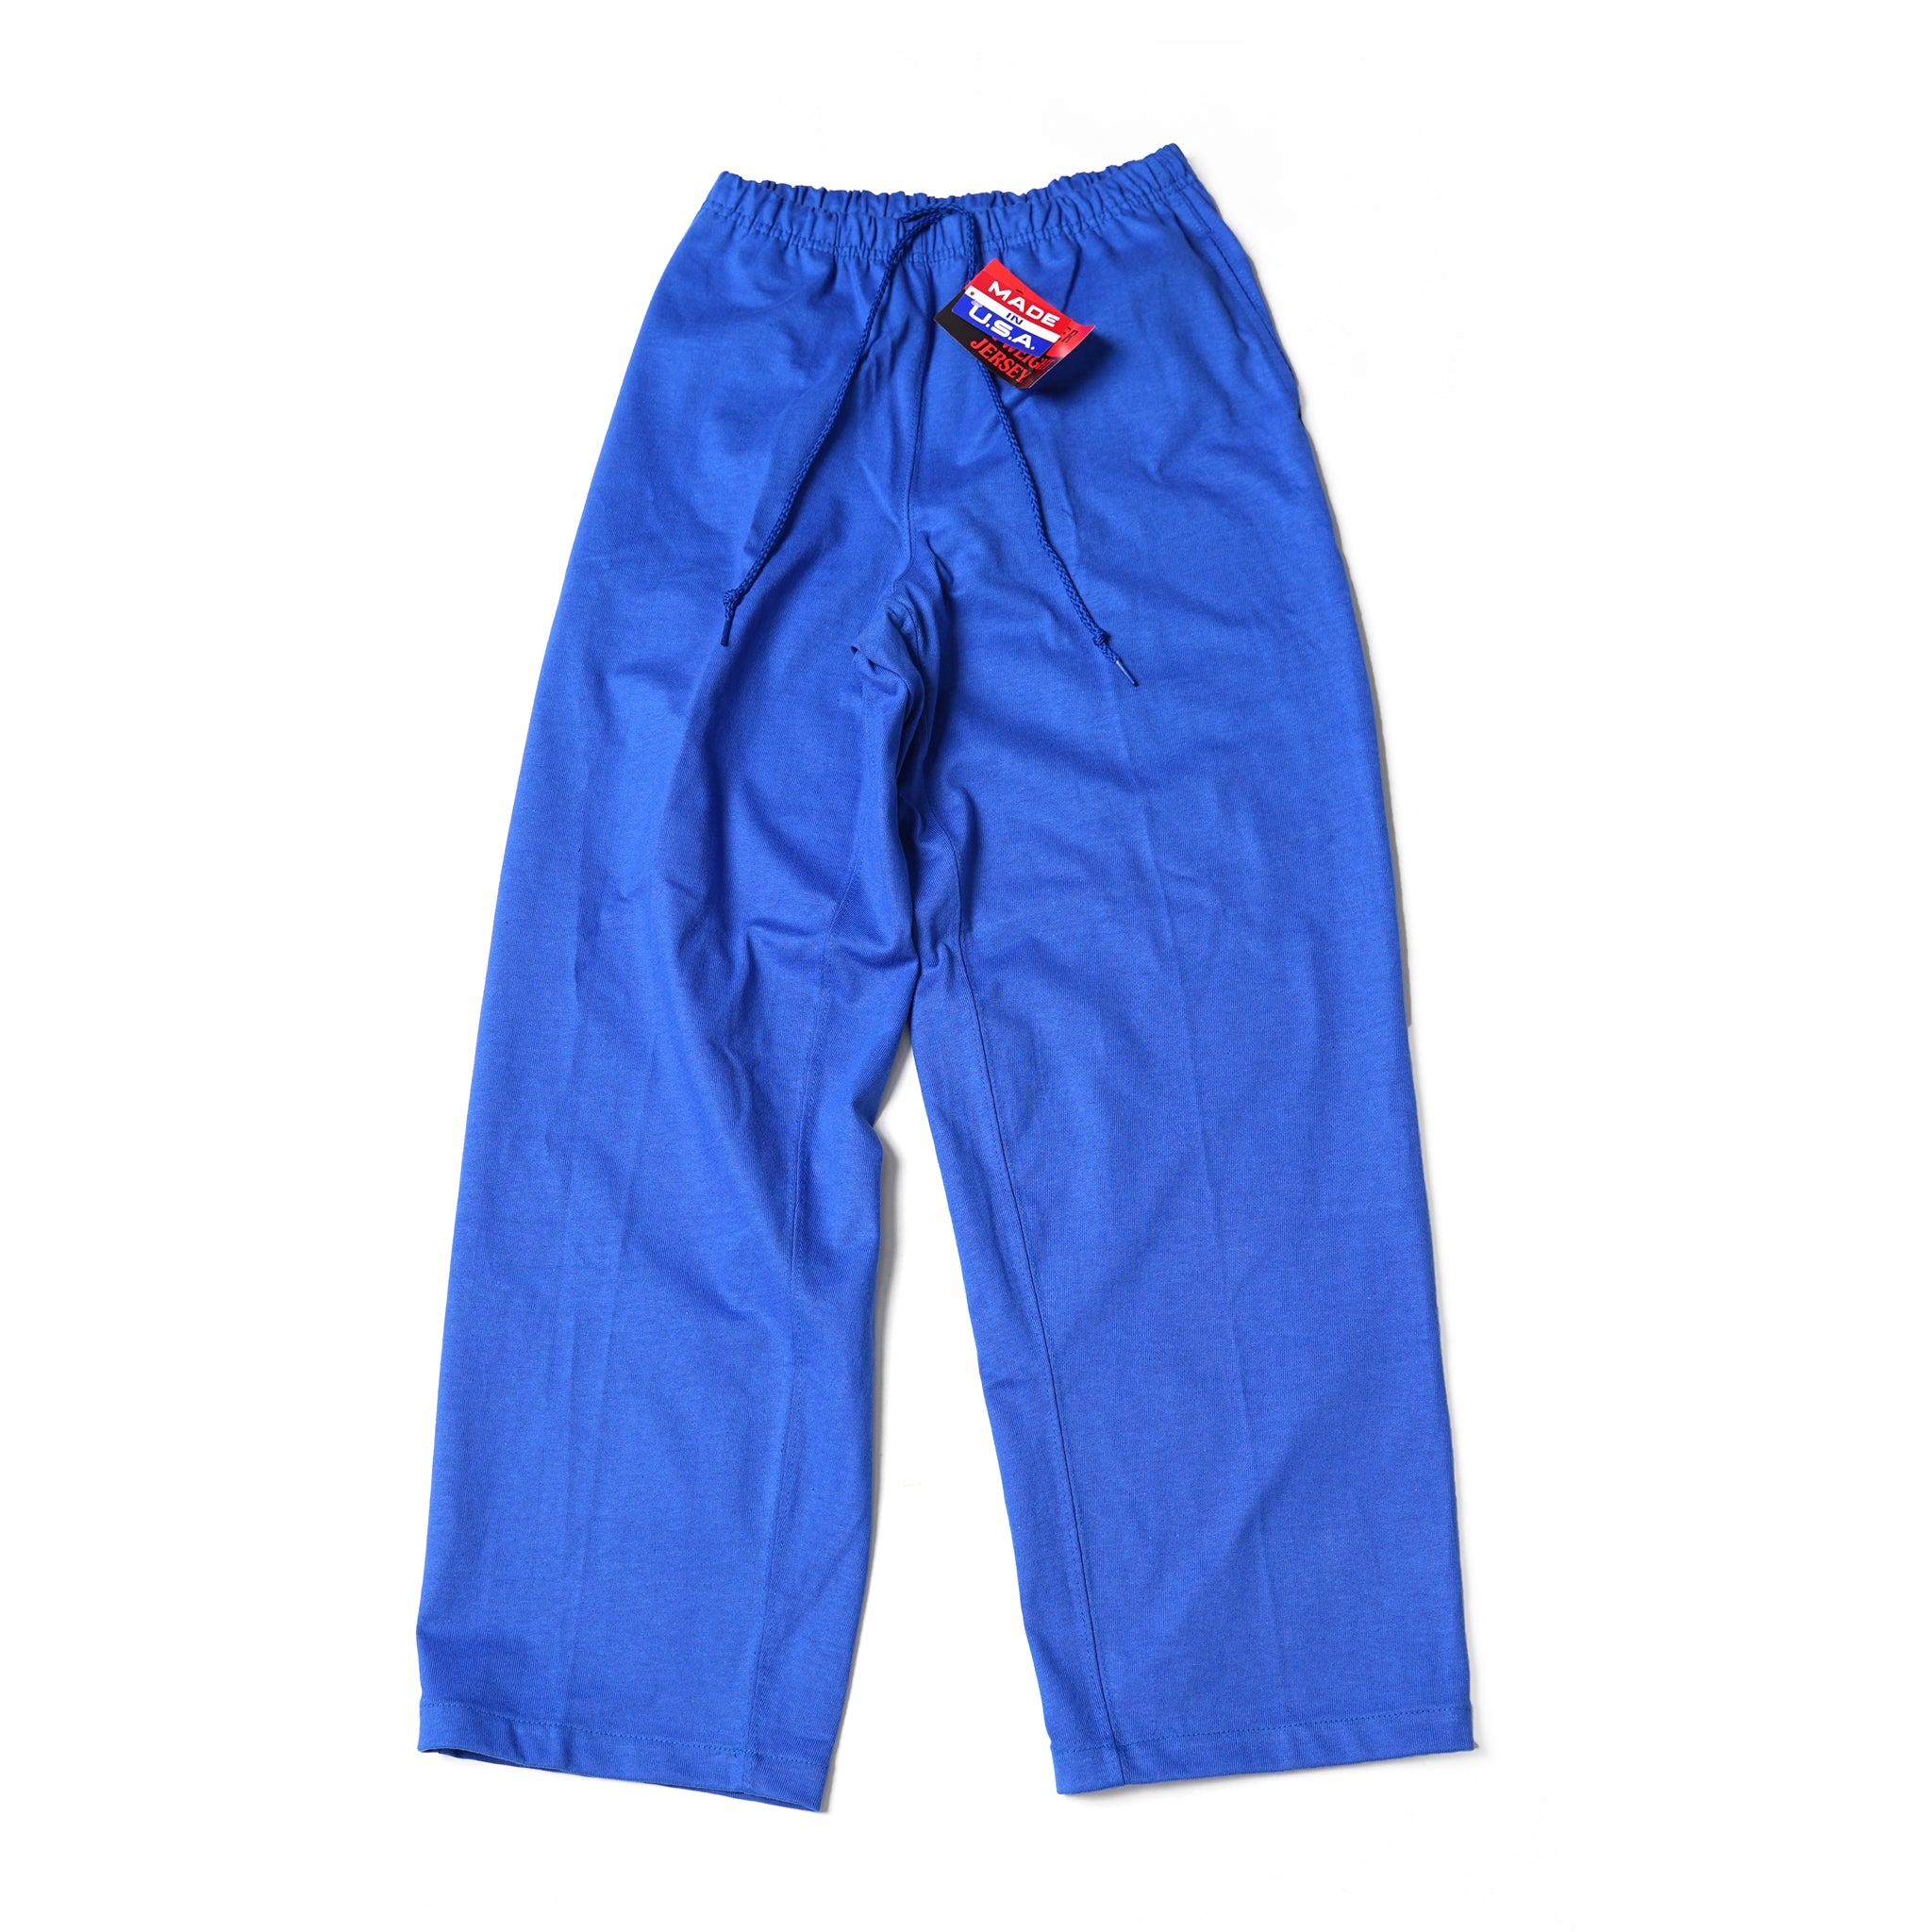 No:#343 | Name:COMMONER PANT_CAMBER 80z MAXXX-WEIGHT COTTON! | Color:8 Colors | Size:S/M/L/XL | 【SMOKE TONE×CAMBER】【DG THE DRY GOODS】